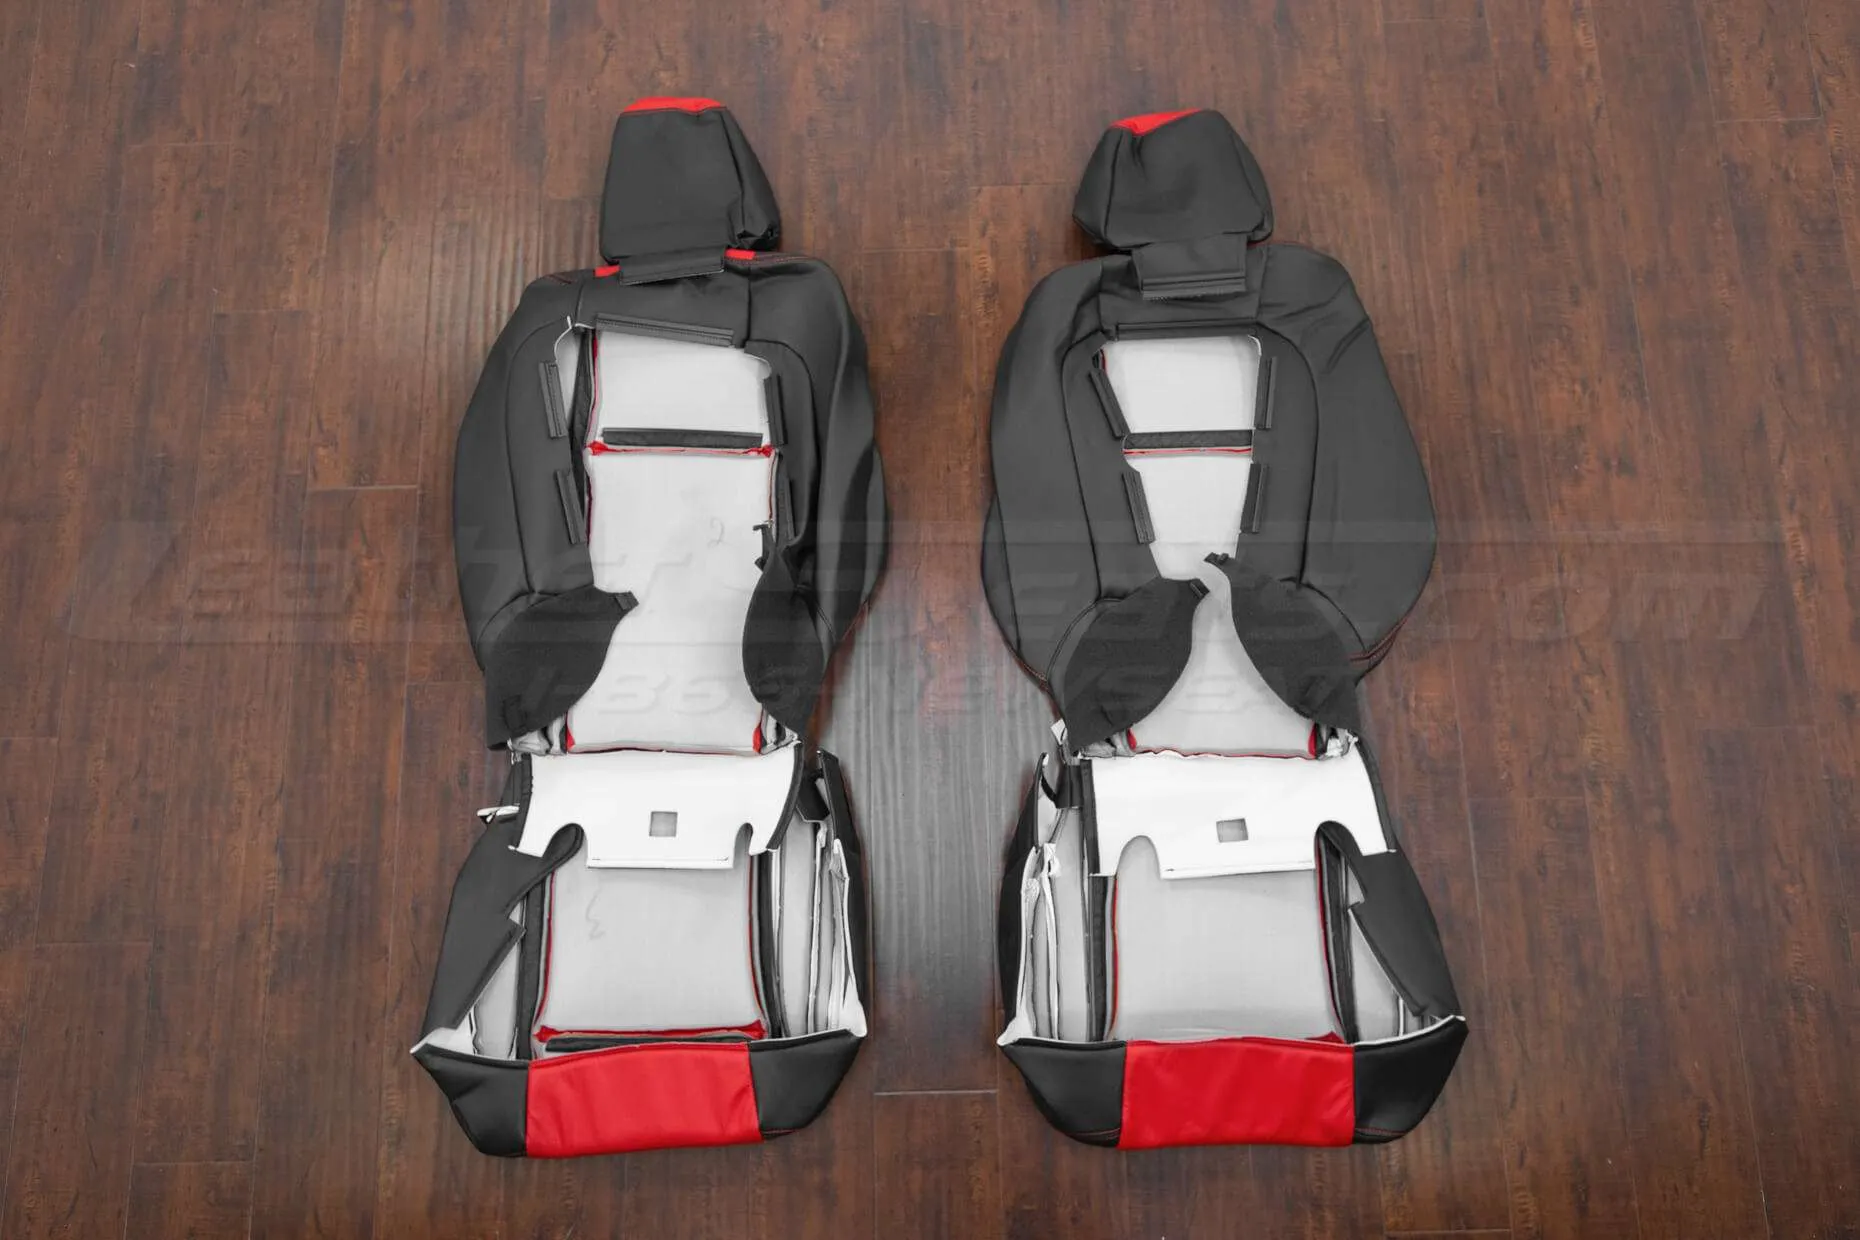 15-20 Dodge Challenger Upholstery Kit - Black & Bright Red - Back view of front seats